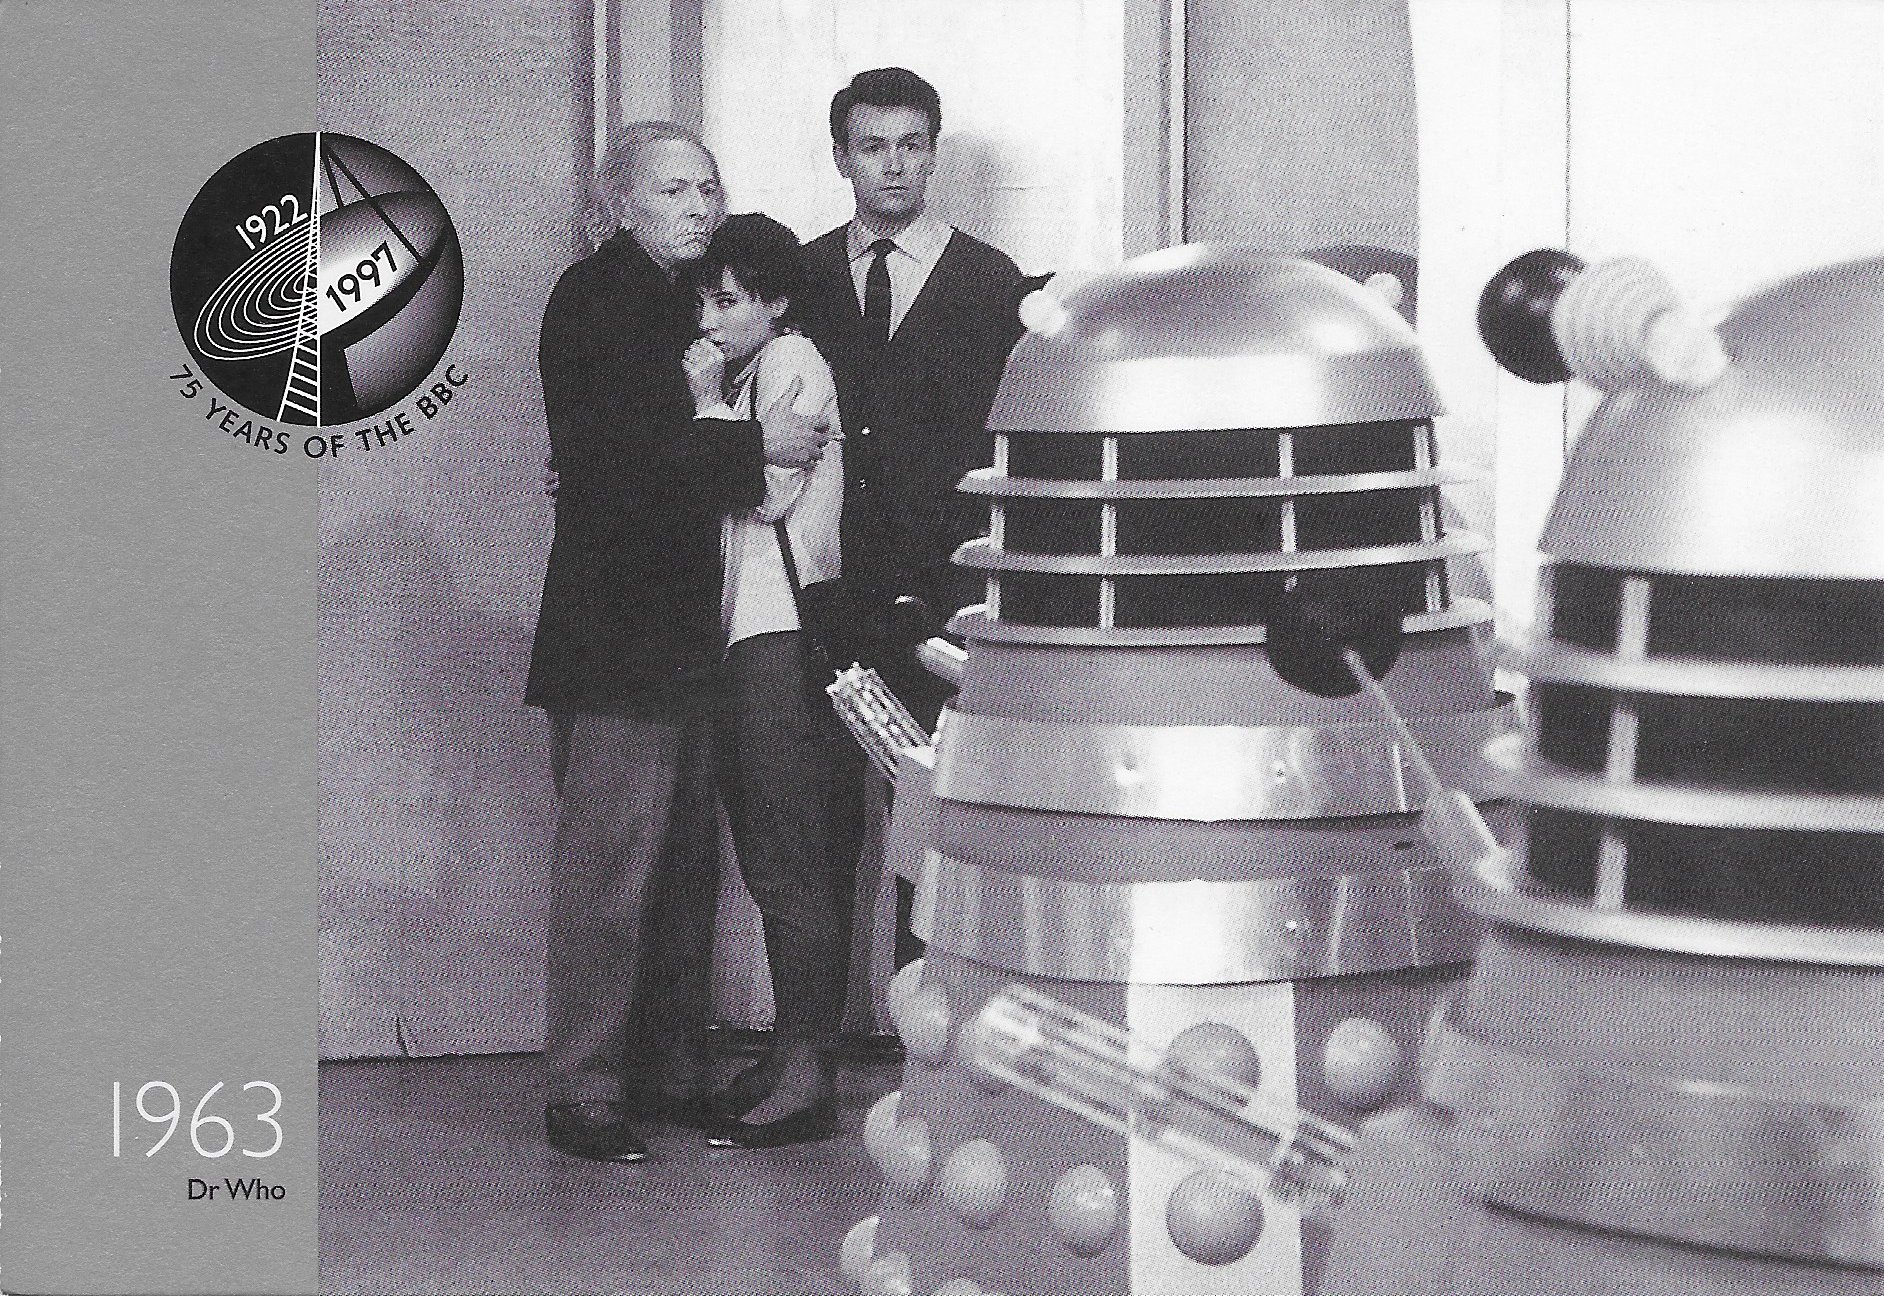 Picture of PC-BBC75-1963 75 years of the BBC - Doctor Who by artist Unknown from the BBC postcards - Records and Tapes library